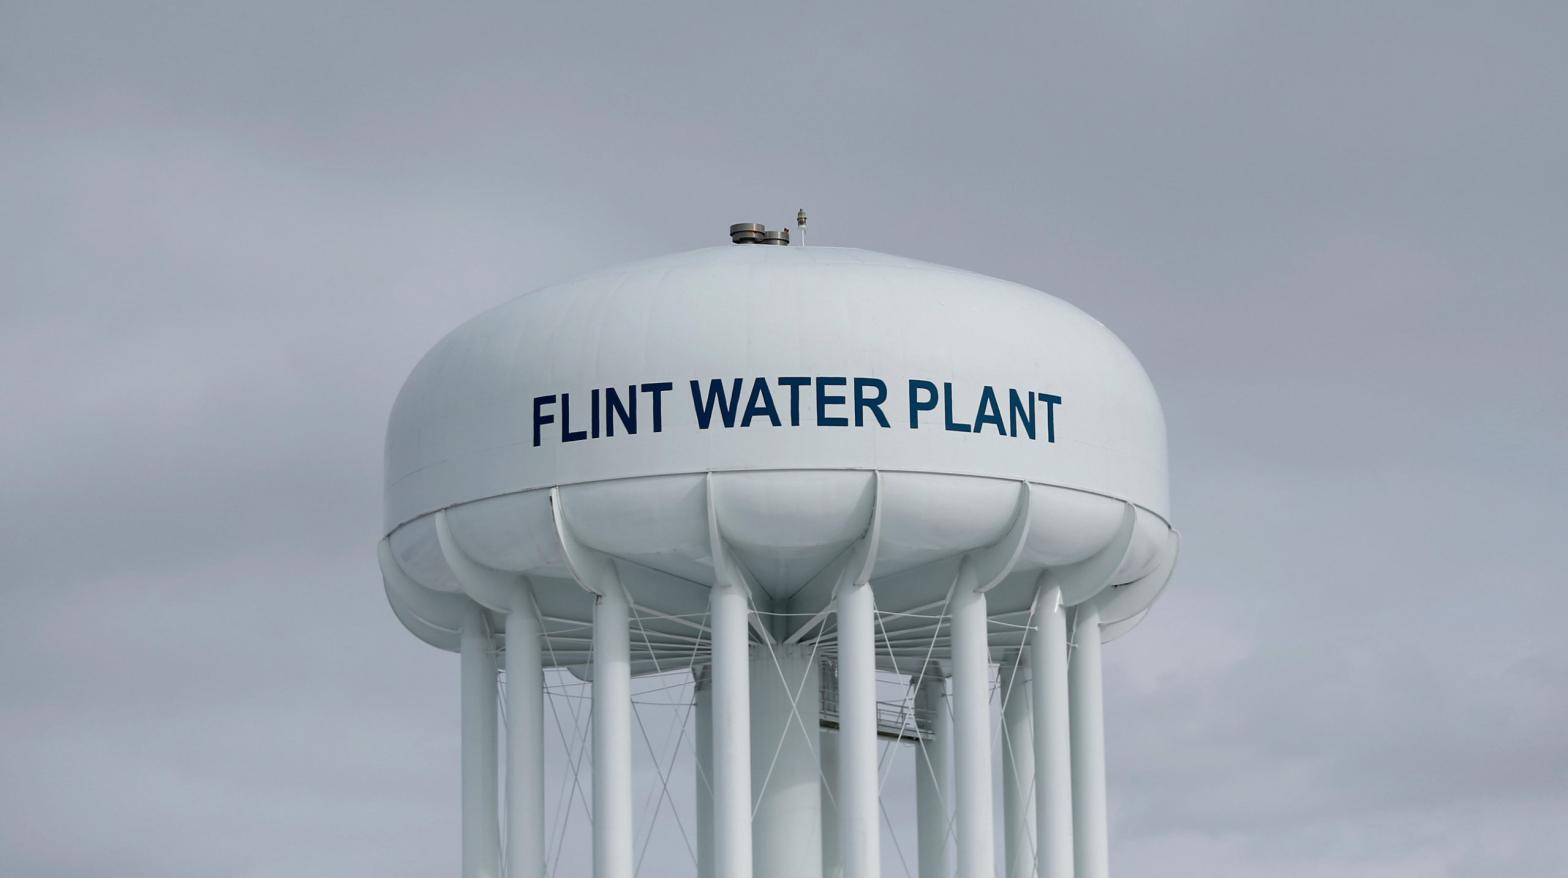 The Flint Water Plant tower hangs over the city in this February 2016 photo. (Photo: Paul Sancya, AP)